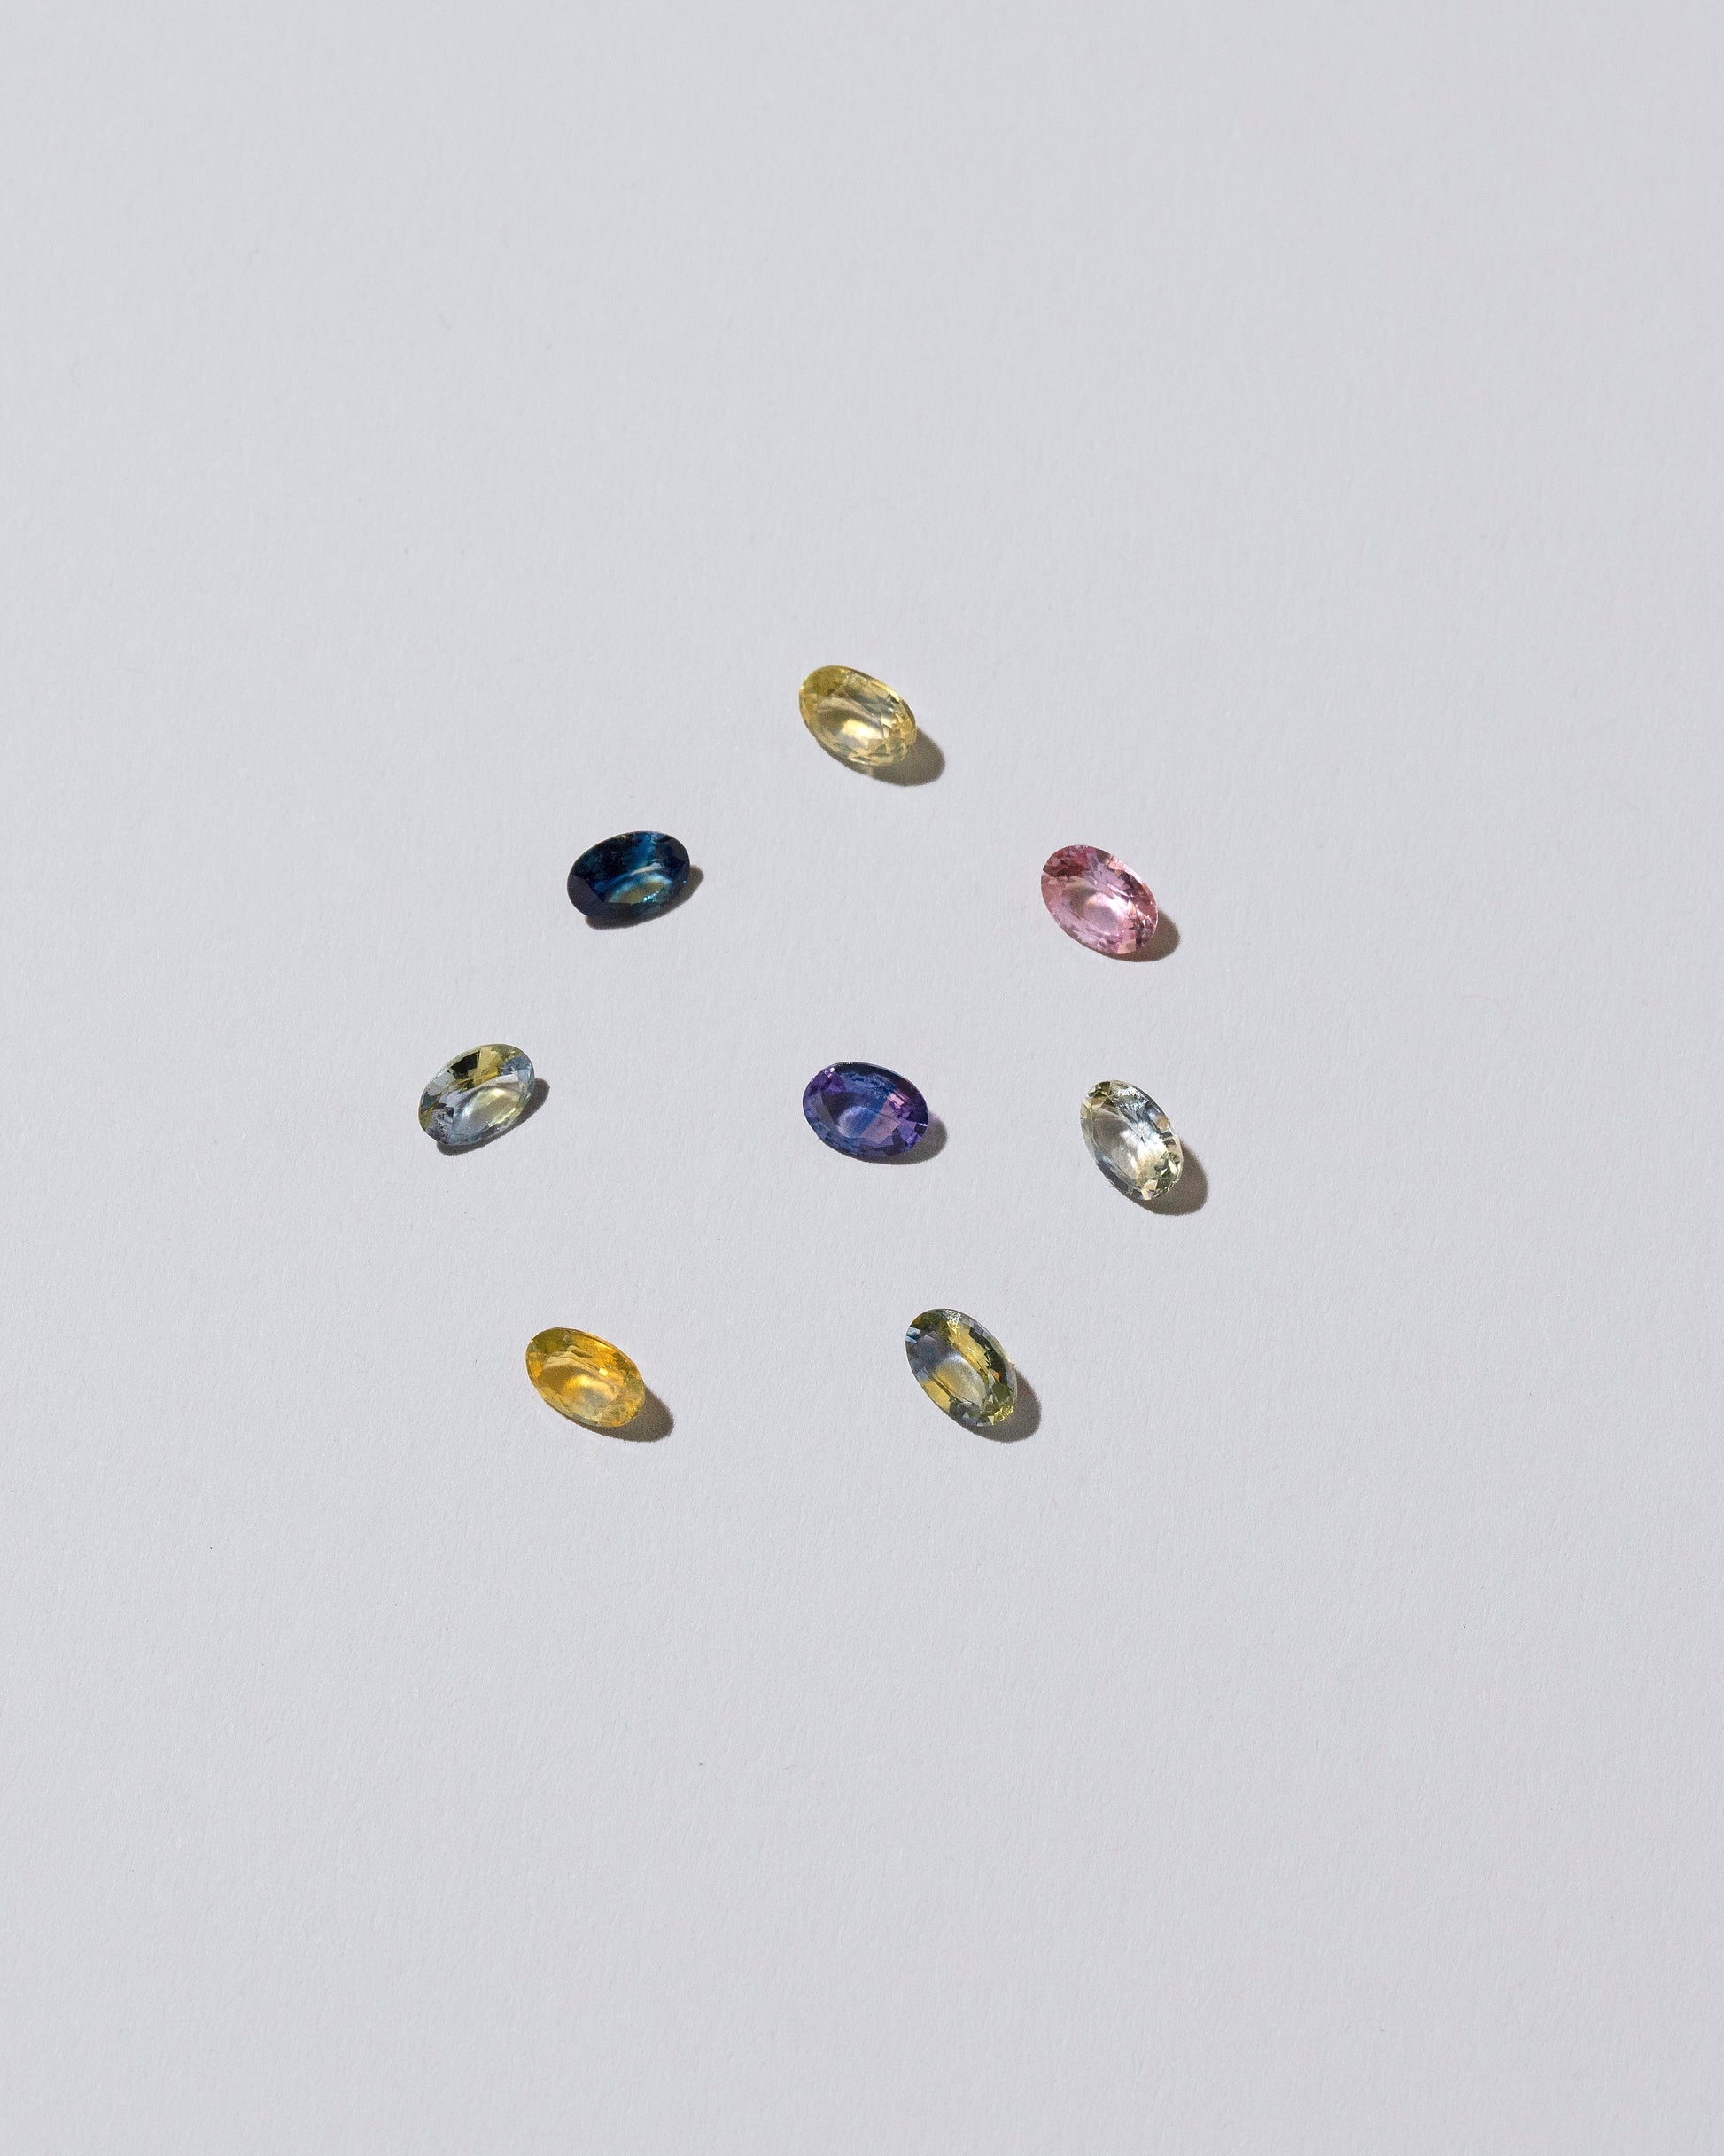 Photo of loose, colored gemstones on a light color background.